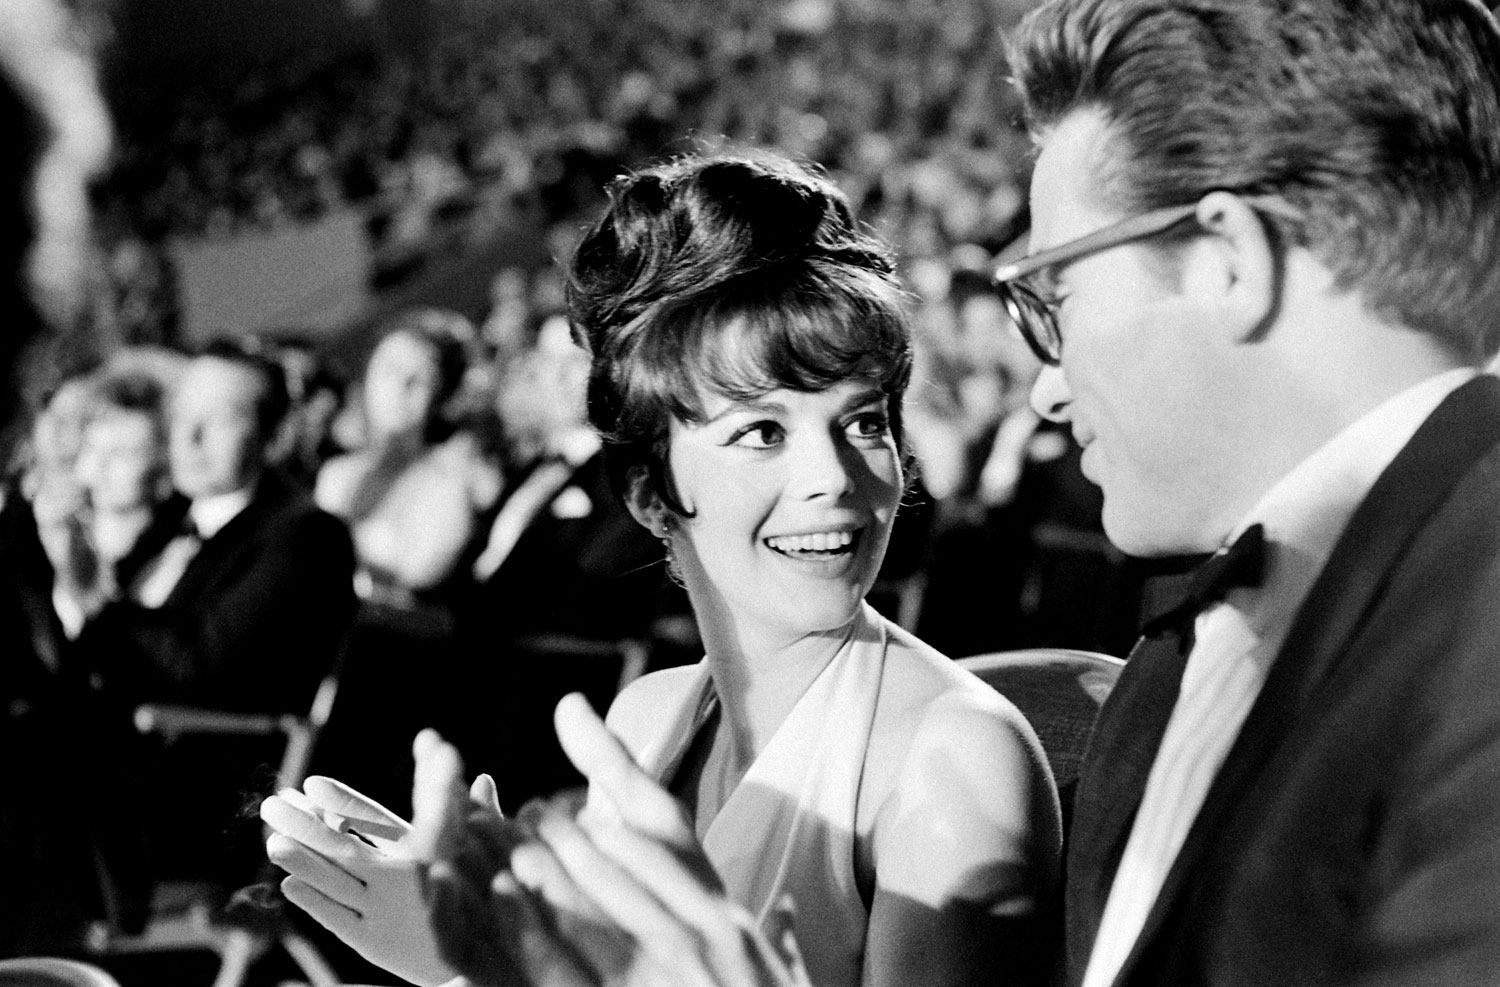 Natalie Wood at the Oscars in 1962.